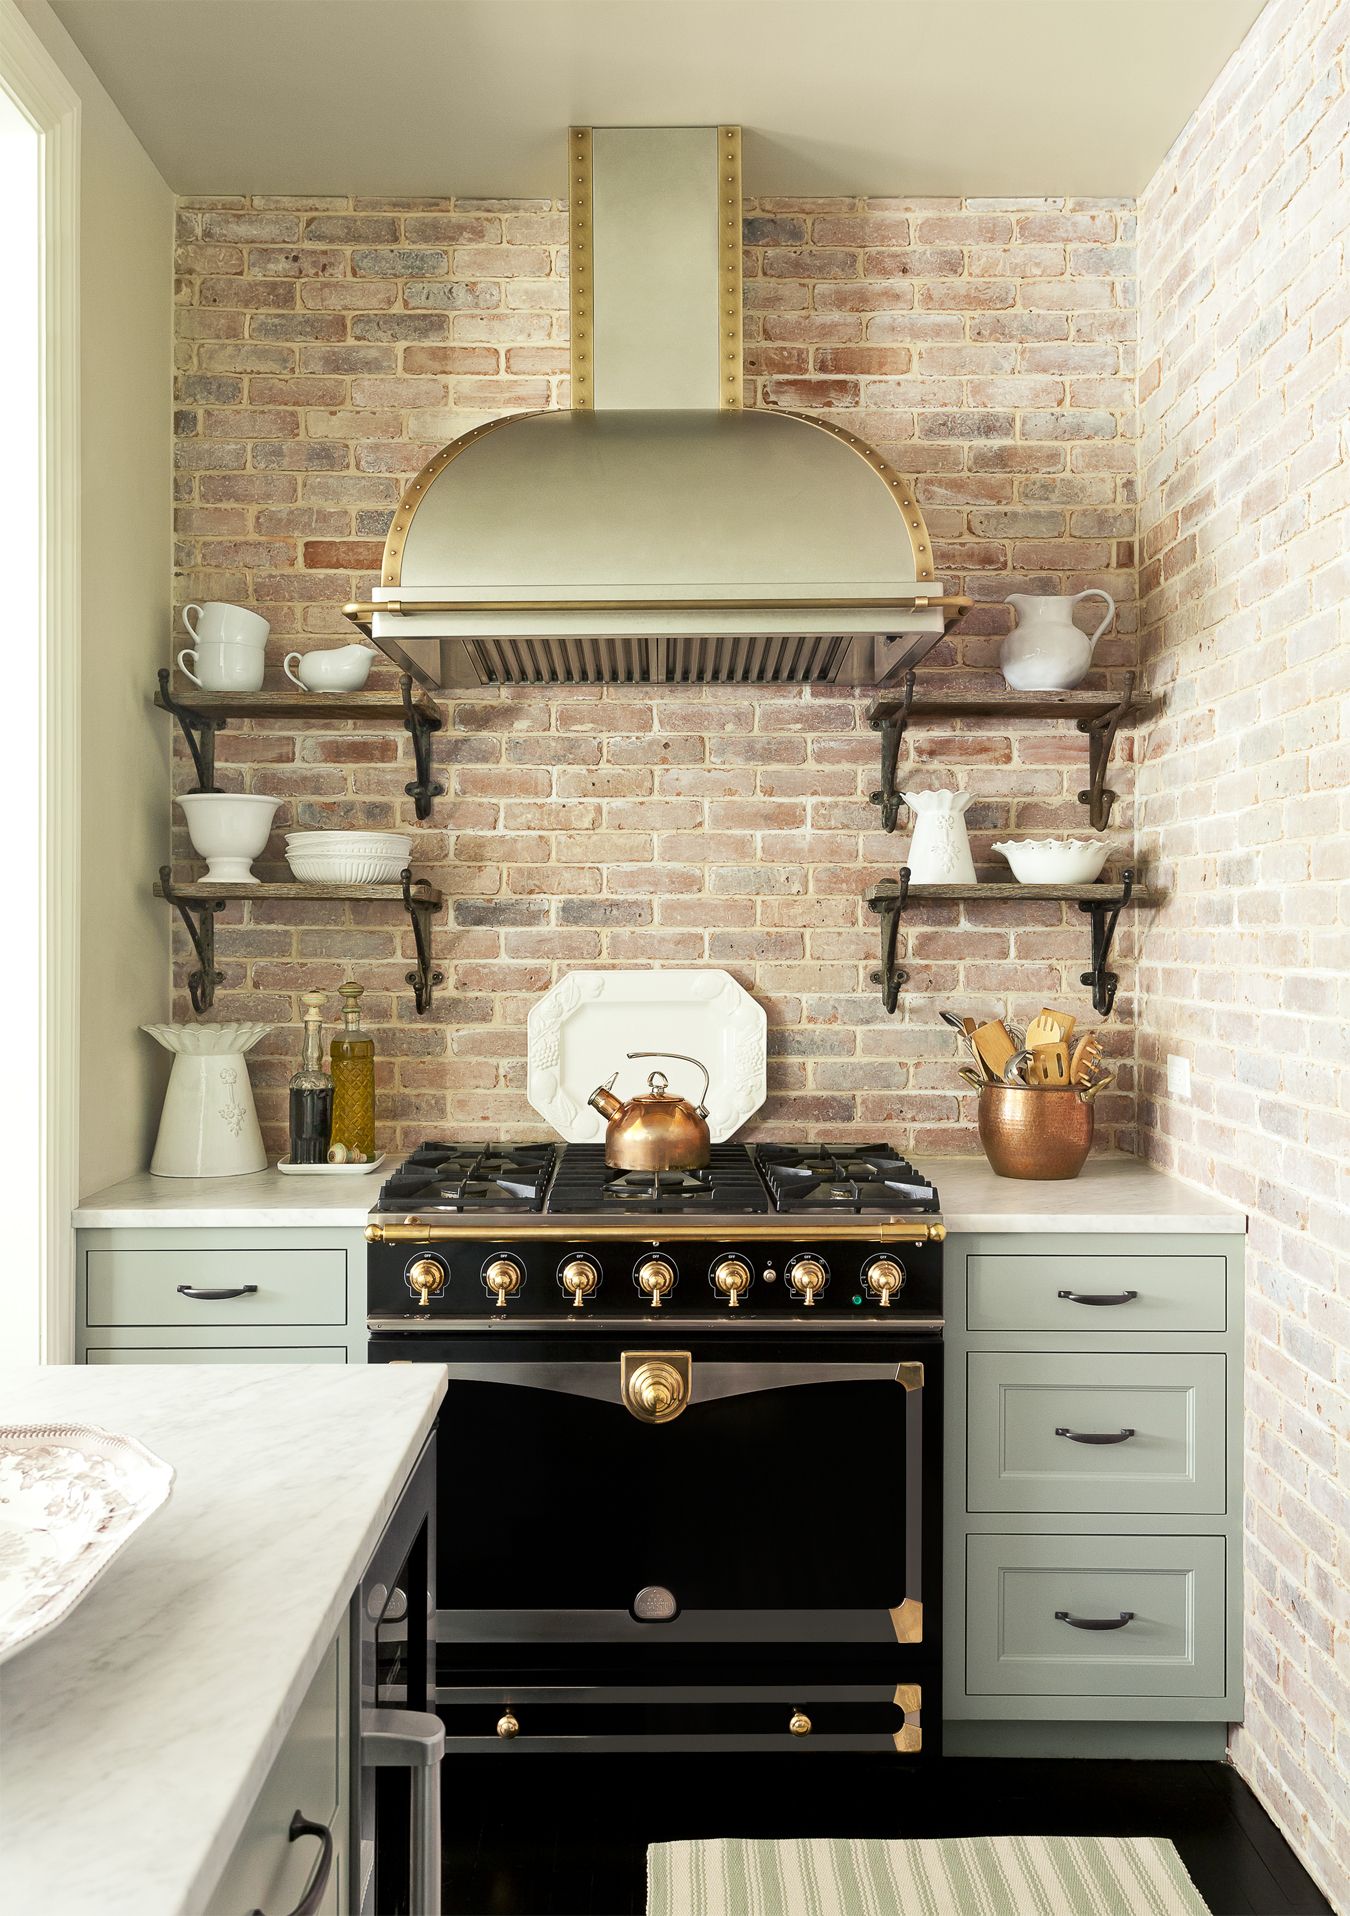 18 Gorgeous Kitchen Range Hoods That Are Eye Candy Not Eyesores ...